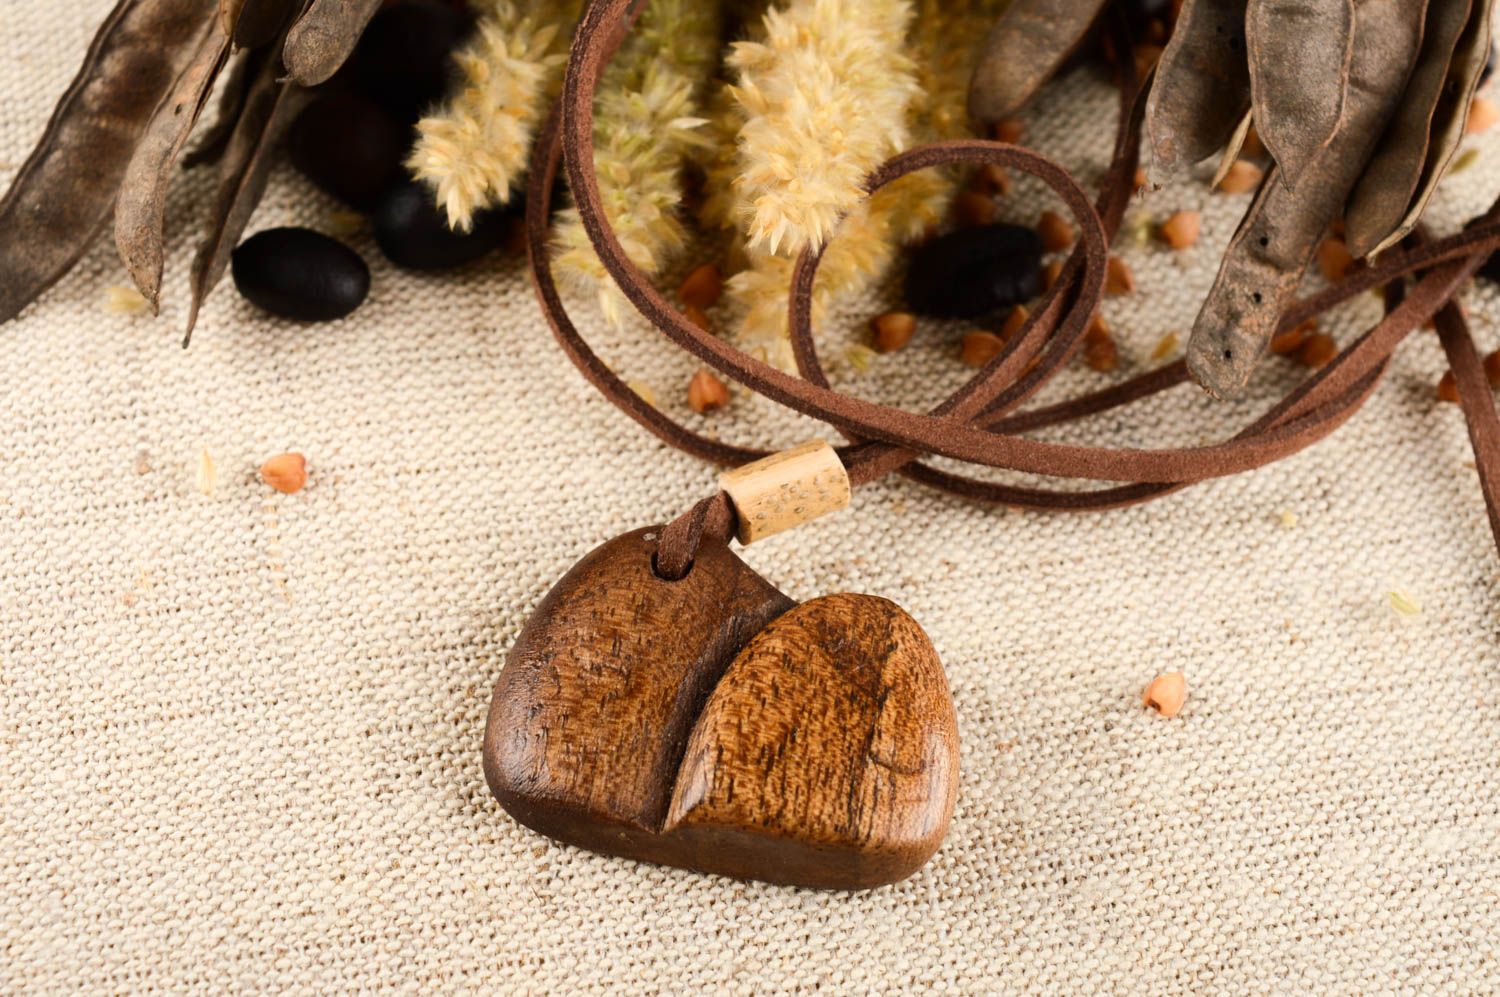 Unusual handmade wooden pendant costume jewelry designs wood craft small gifts photo 1